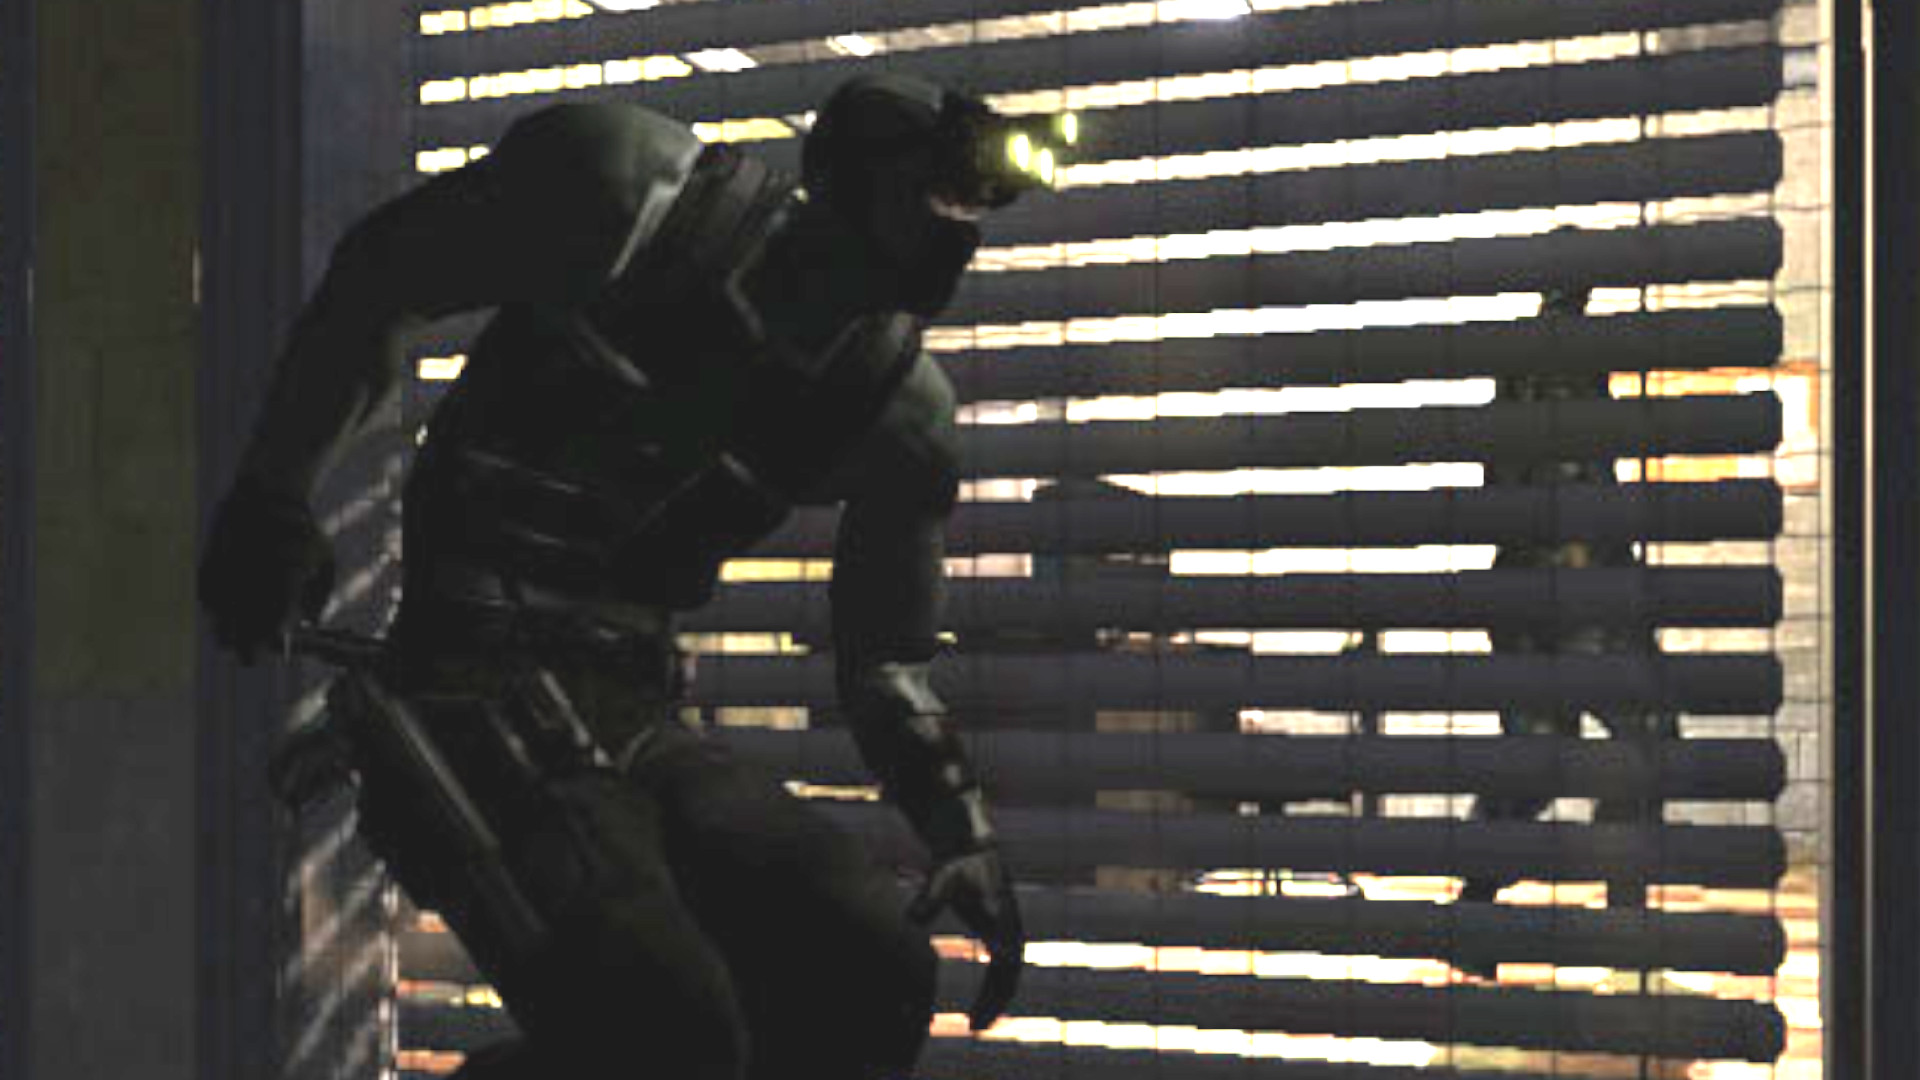 Tom Clancys Splinter Cell Chaos Theory Wallpapers